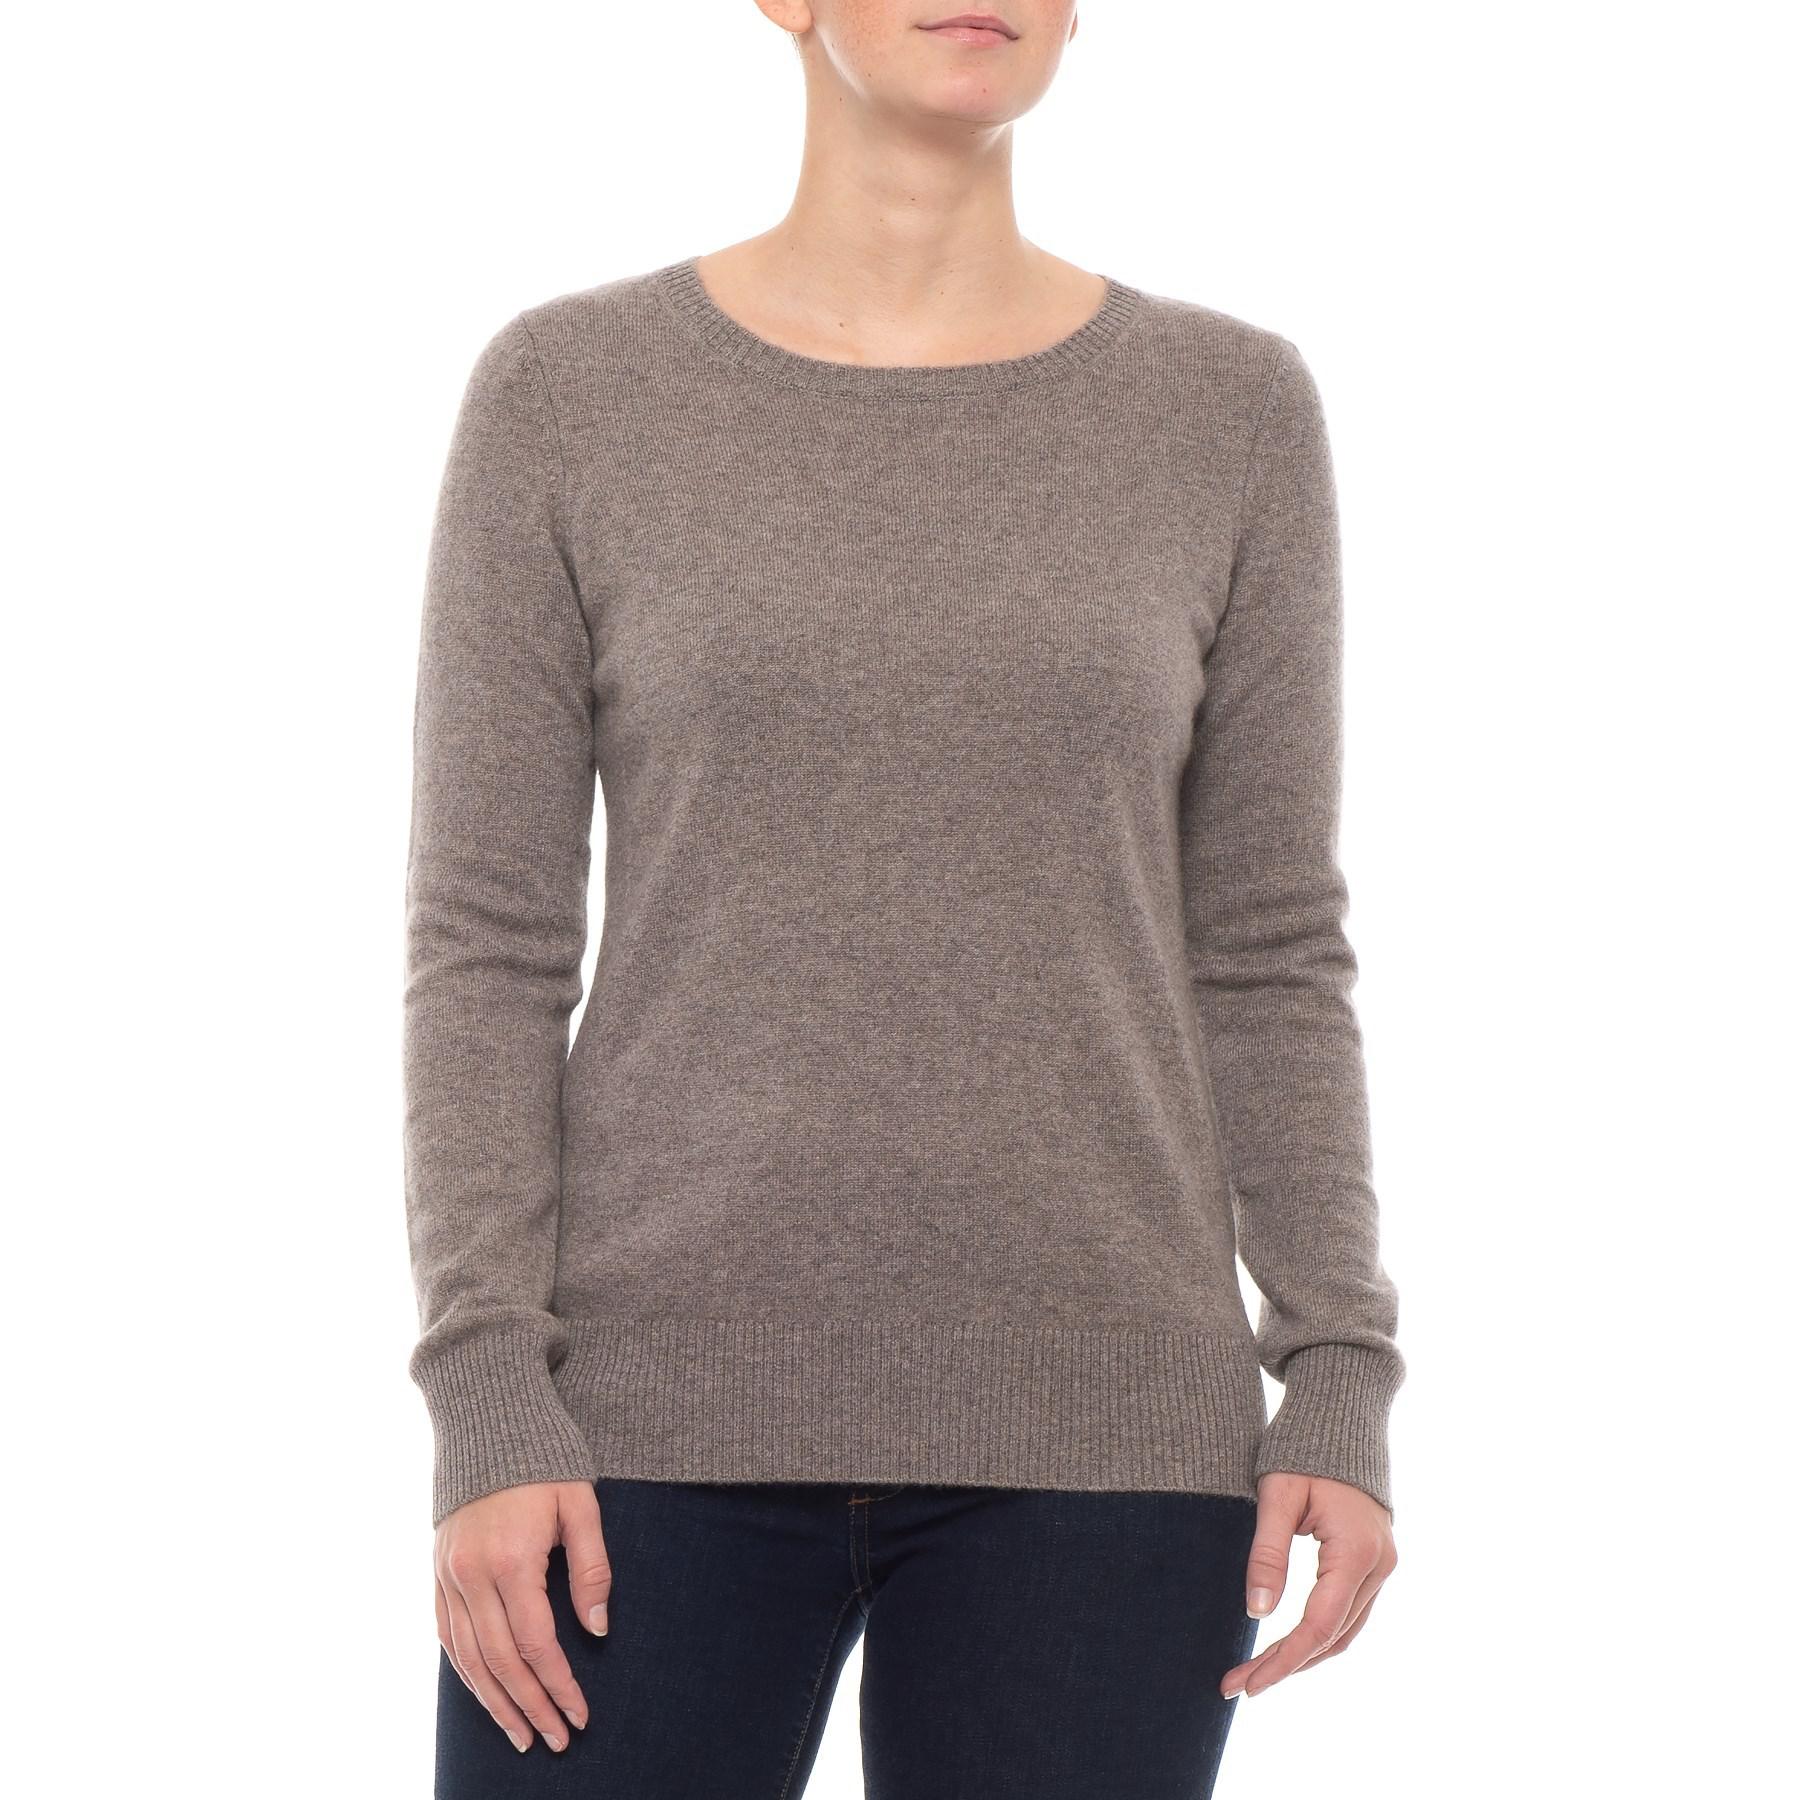 Cynthia Rowley Cashmere Sweater (for Women) in Taupe Night Heather ...